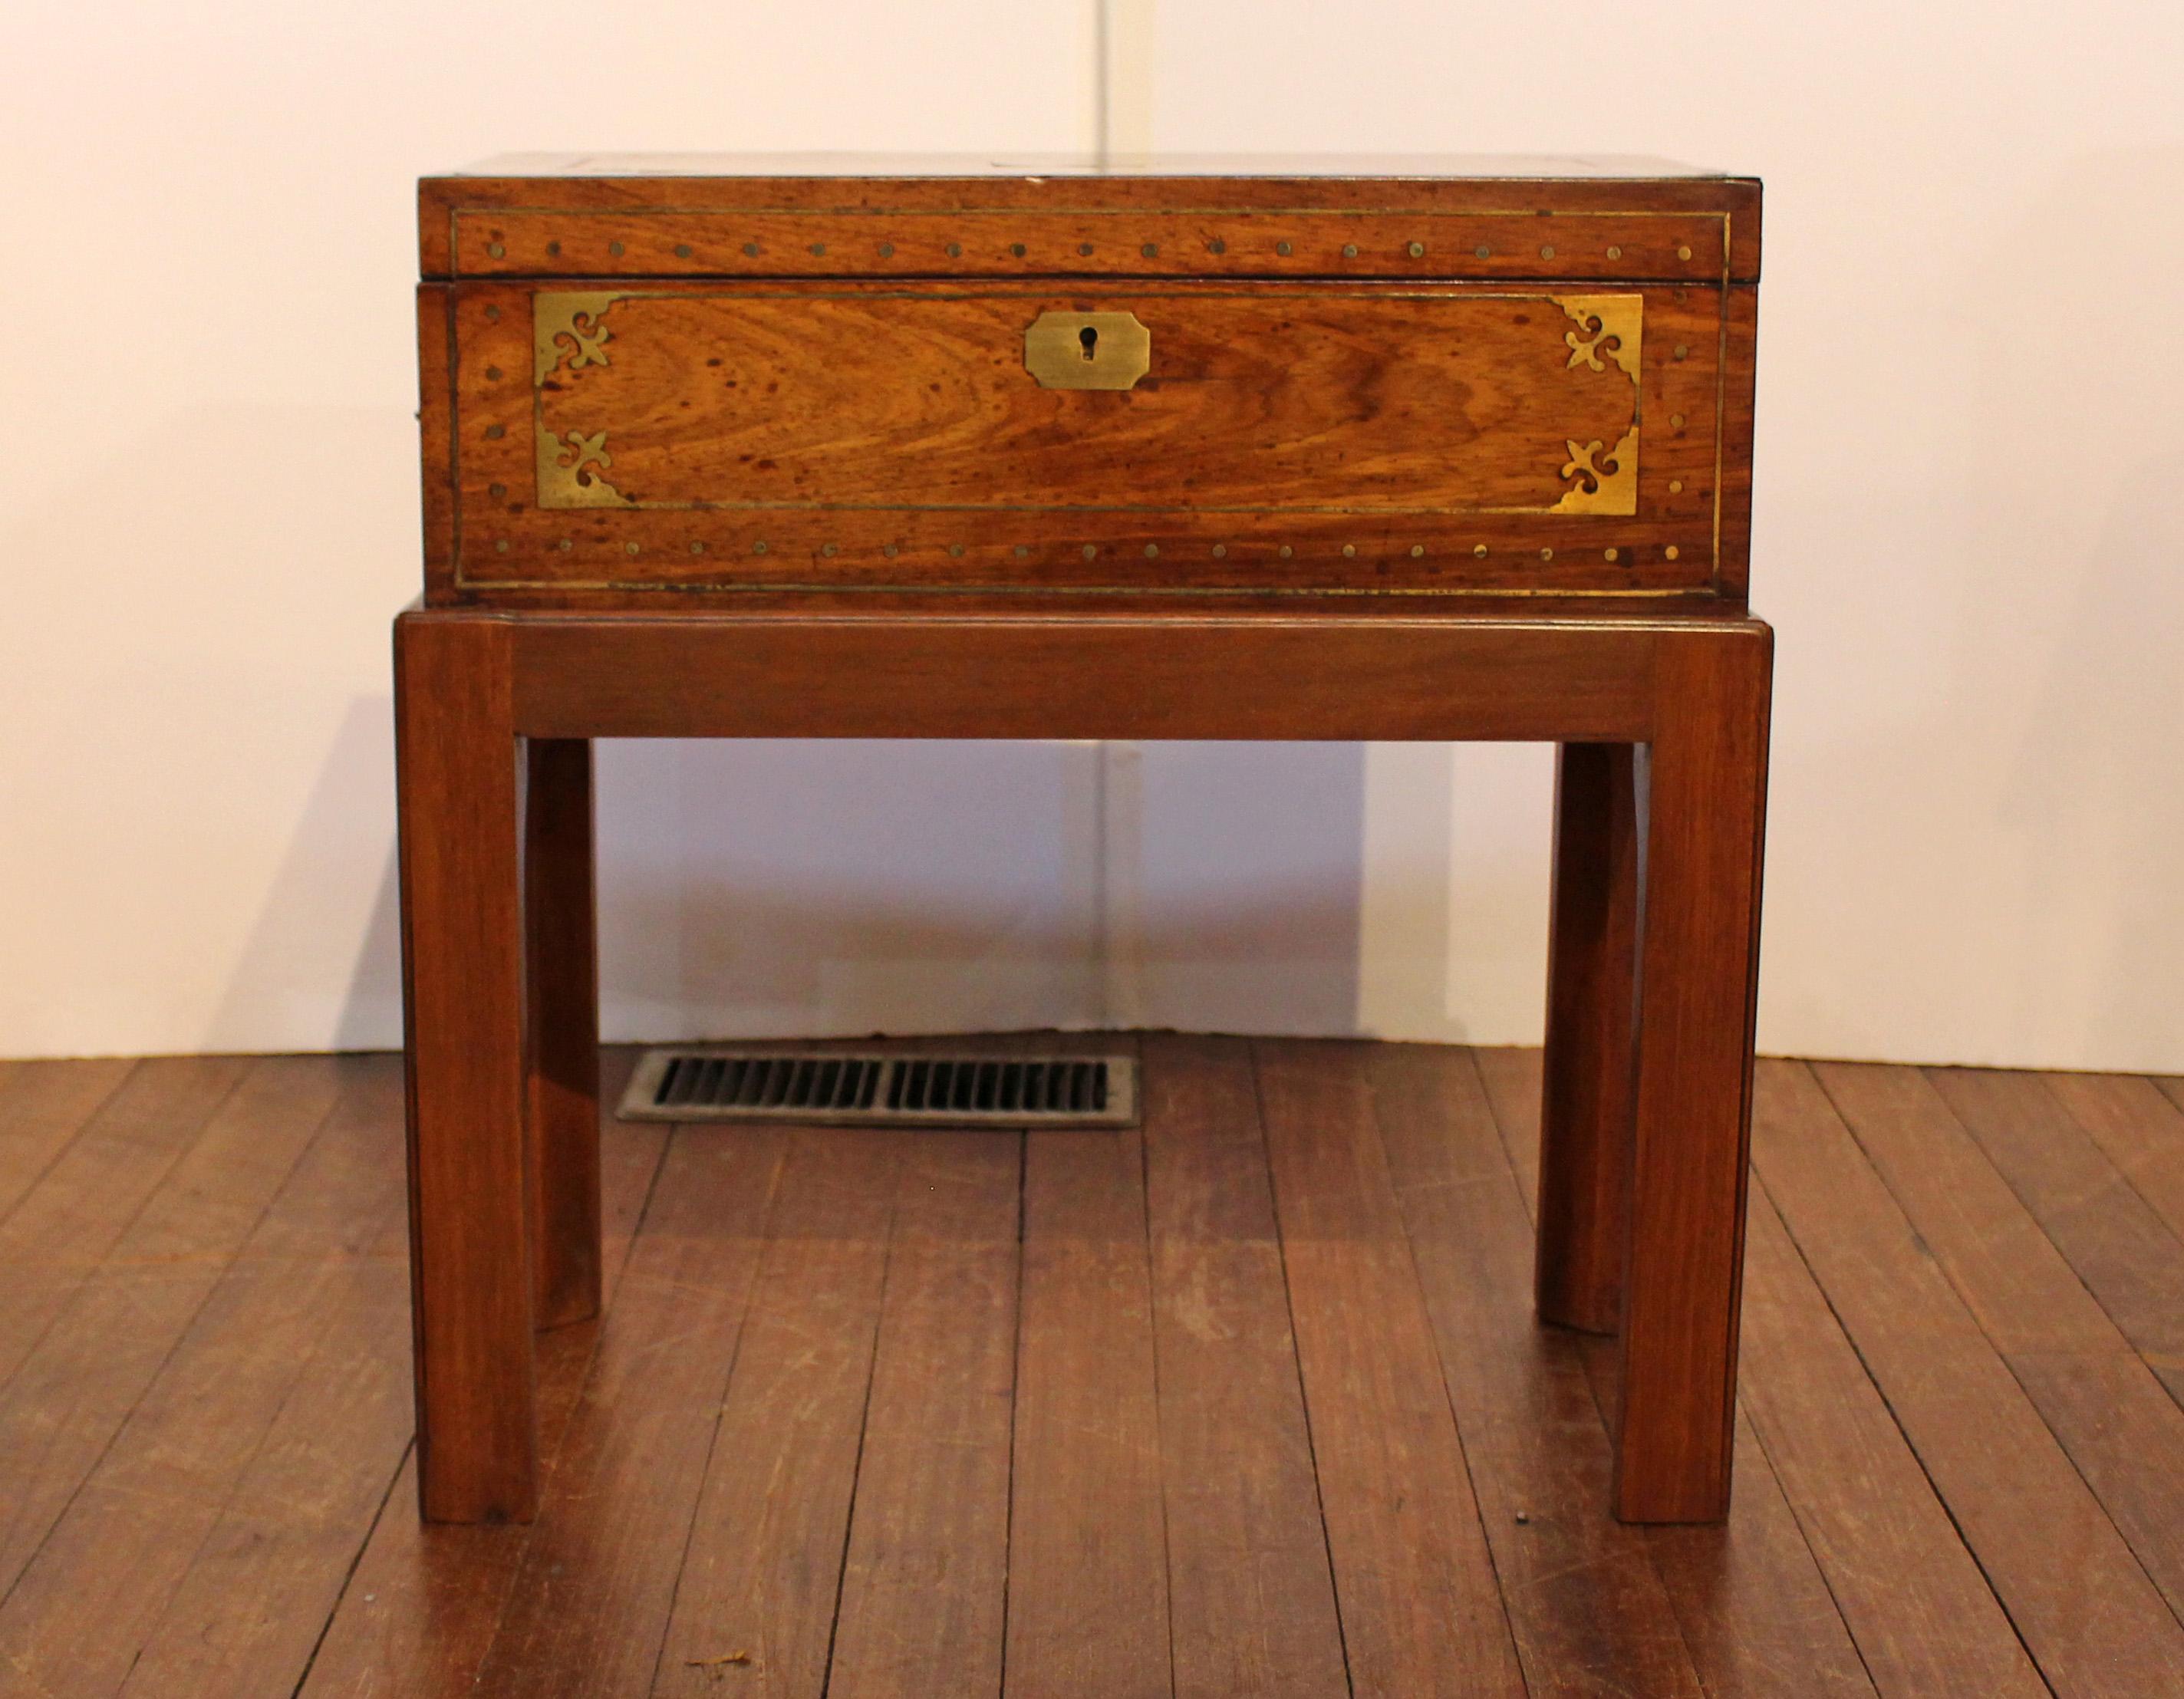 Circa 1820s English lap desk box now on custom made stand for a side table. Late Regency to George IV period. Rosewood with brass line, dot & fleur de lys motifs corner inlays, as well as monogram panel (unused), escutcheon and flat handles recessed